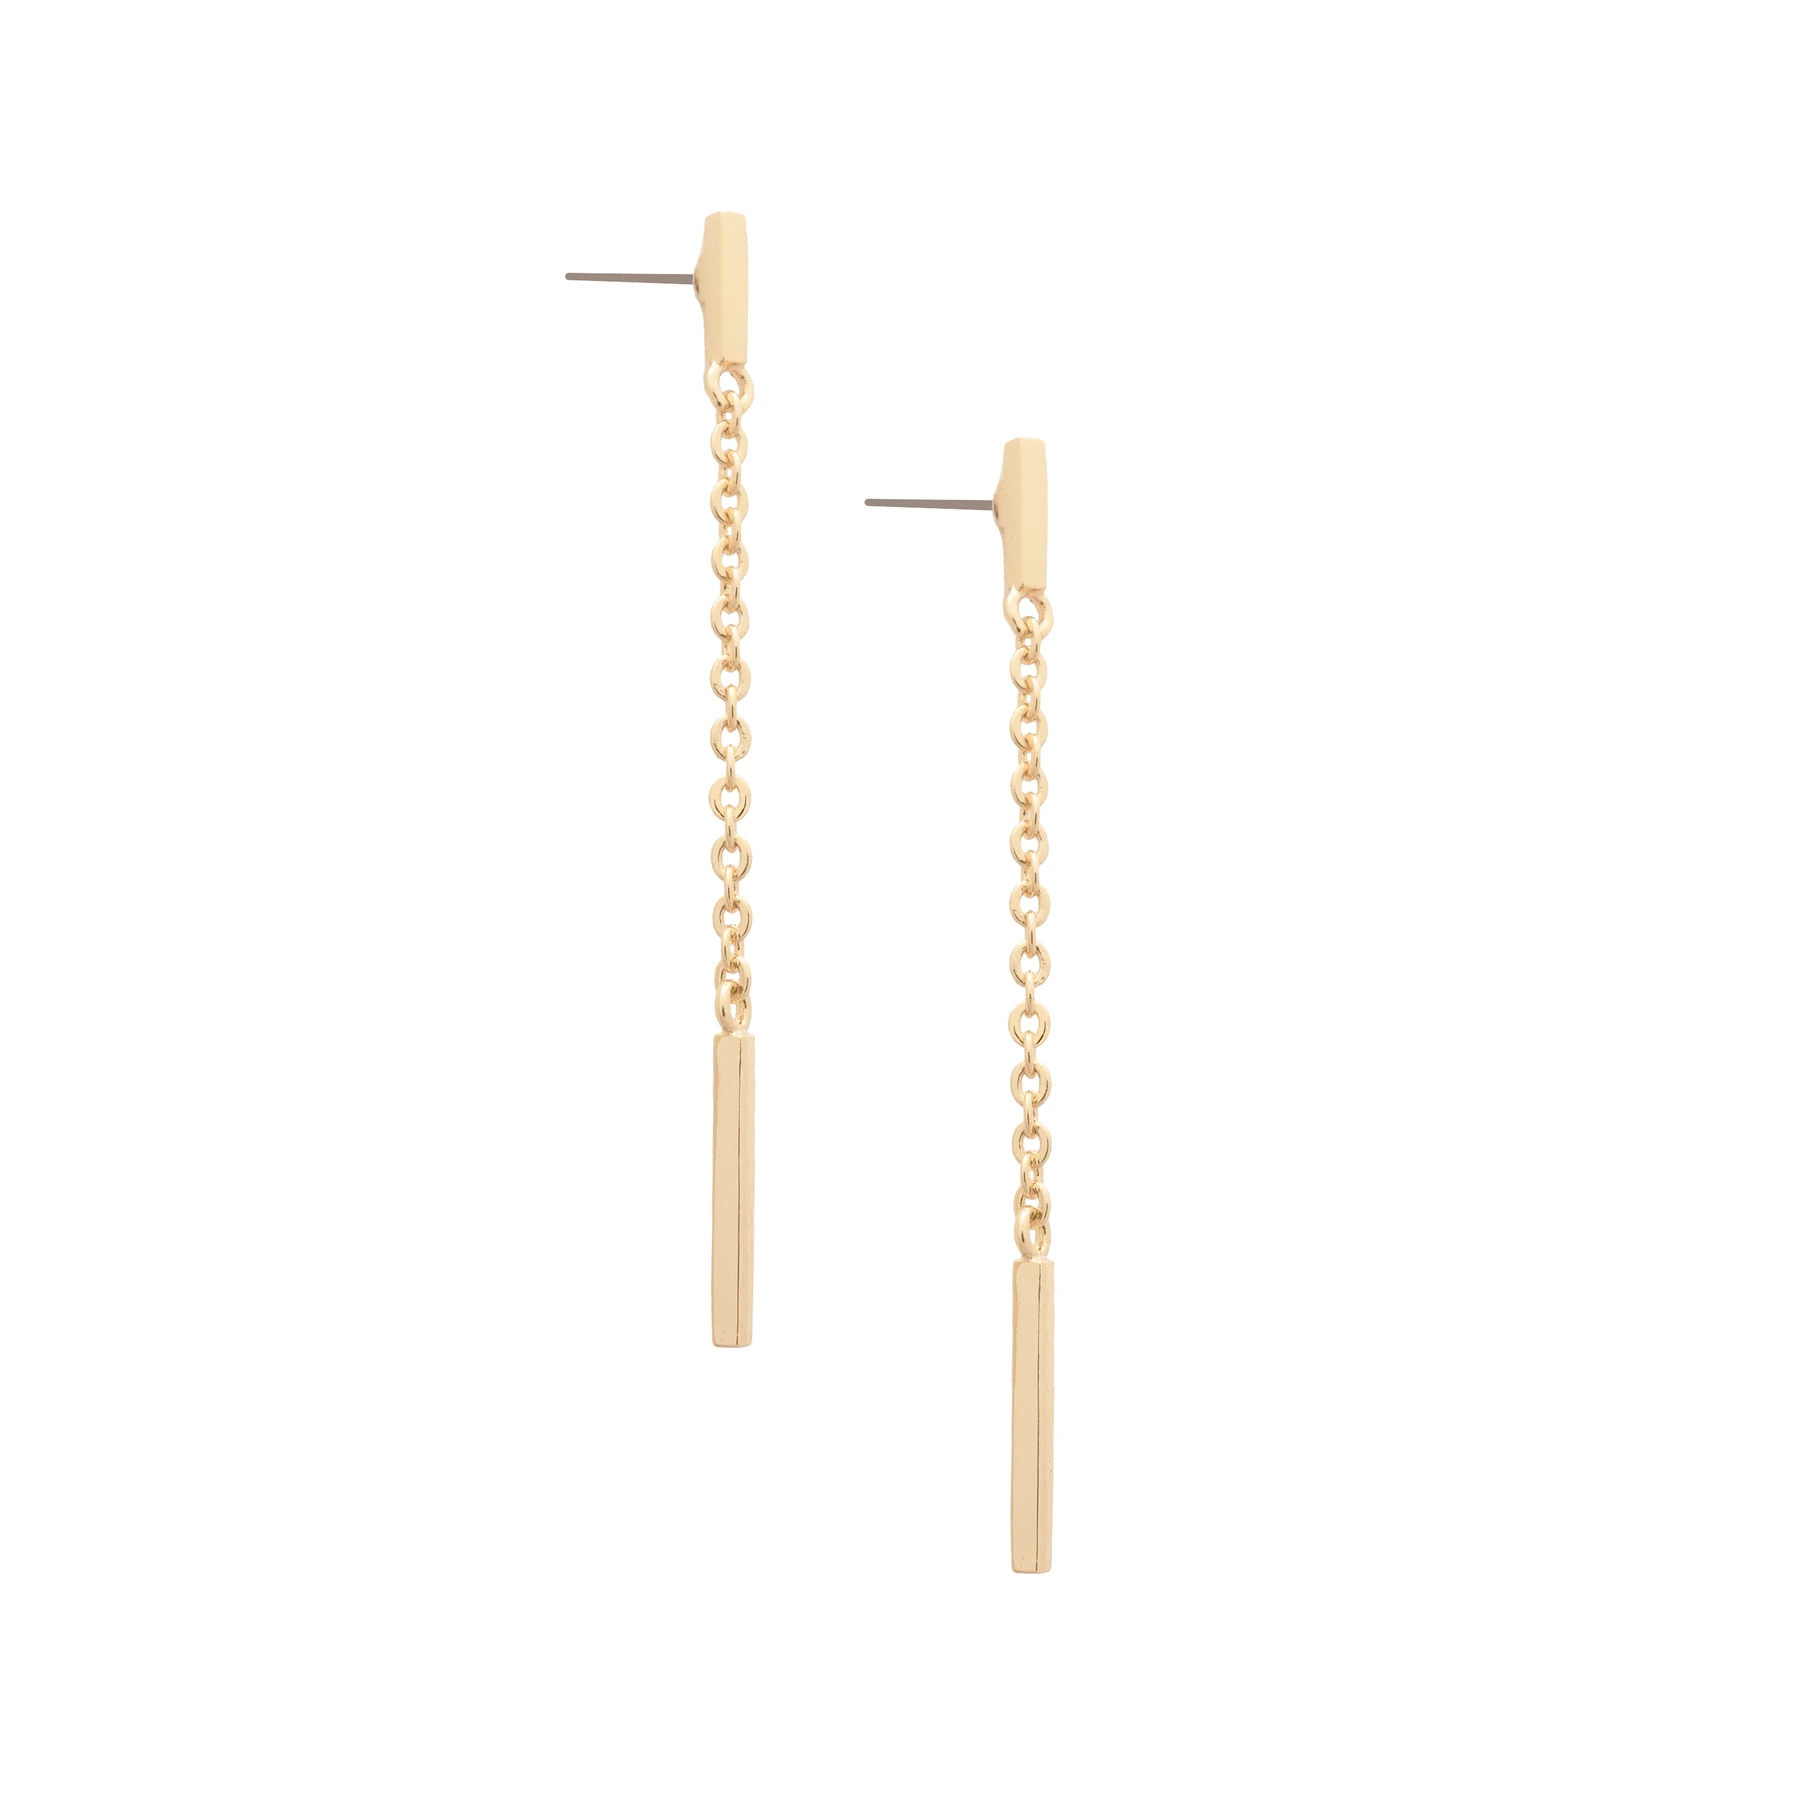 Uncommon James: Empire Earrings - Gold